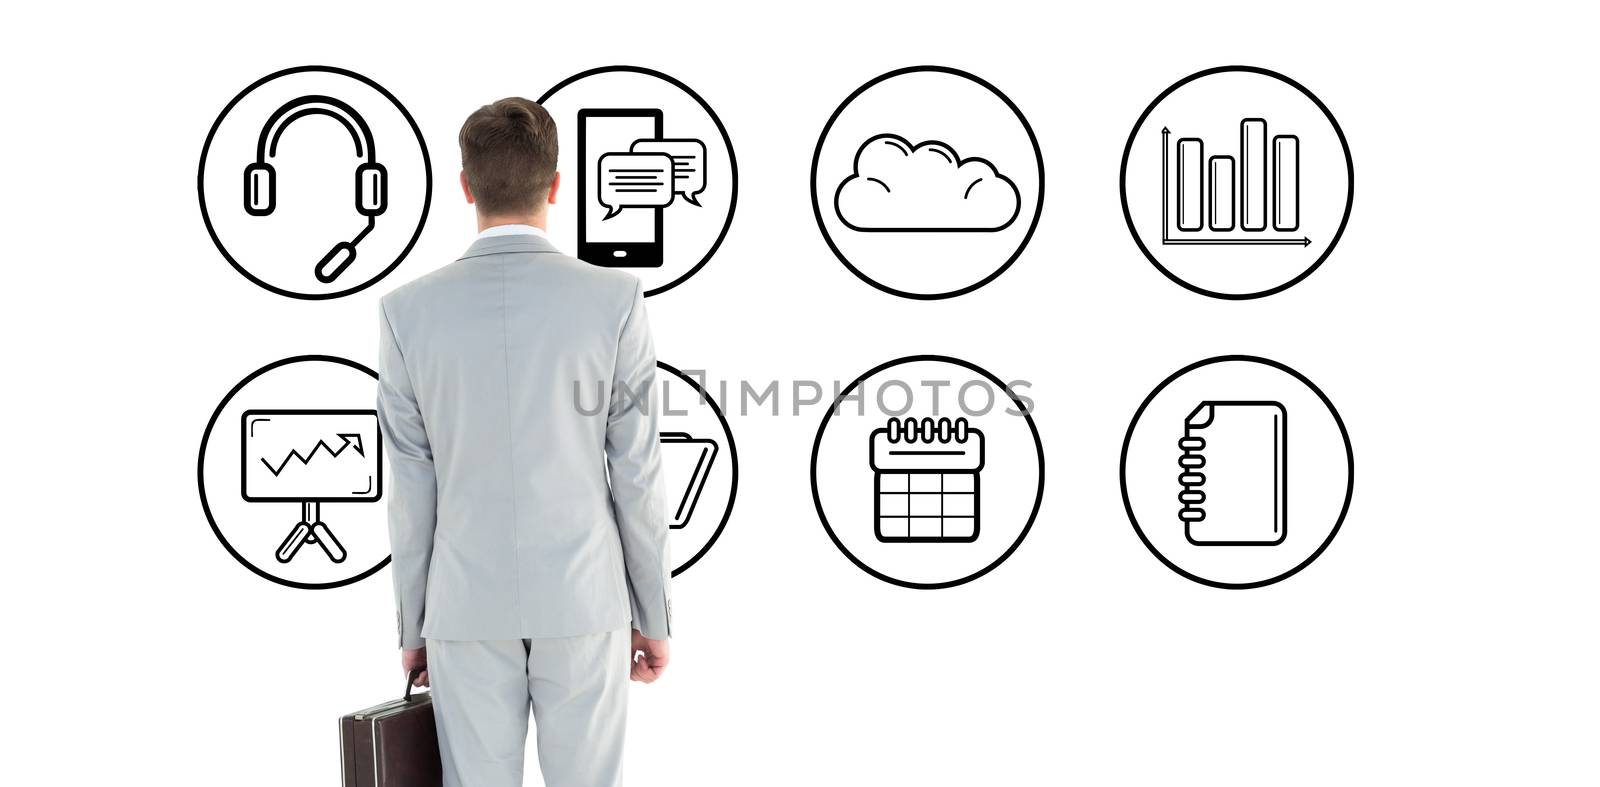 Businessman holding his briefcase against telephone apps icons 